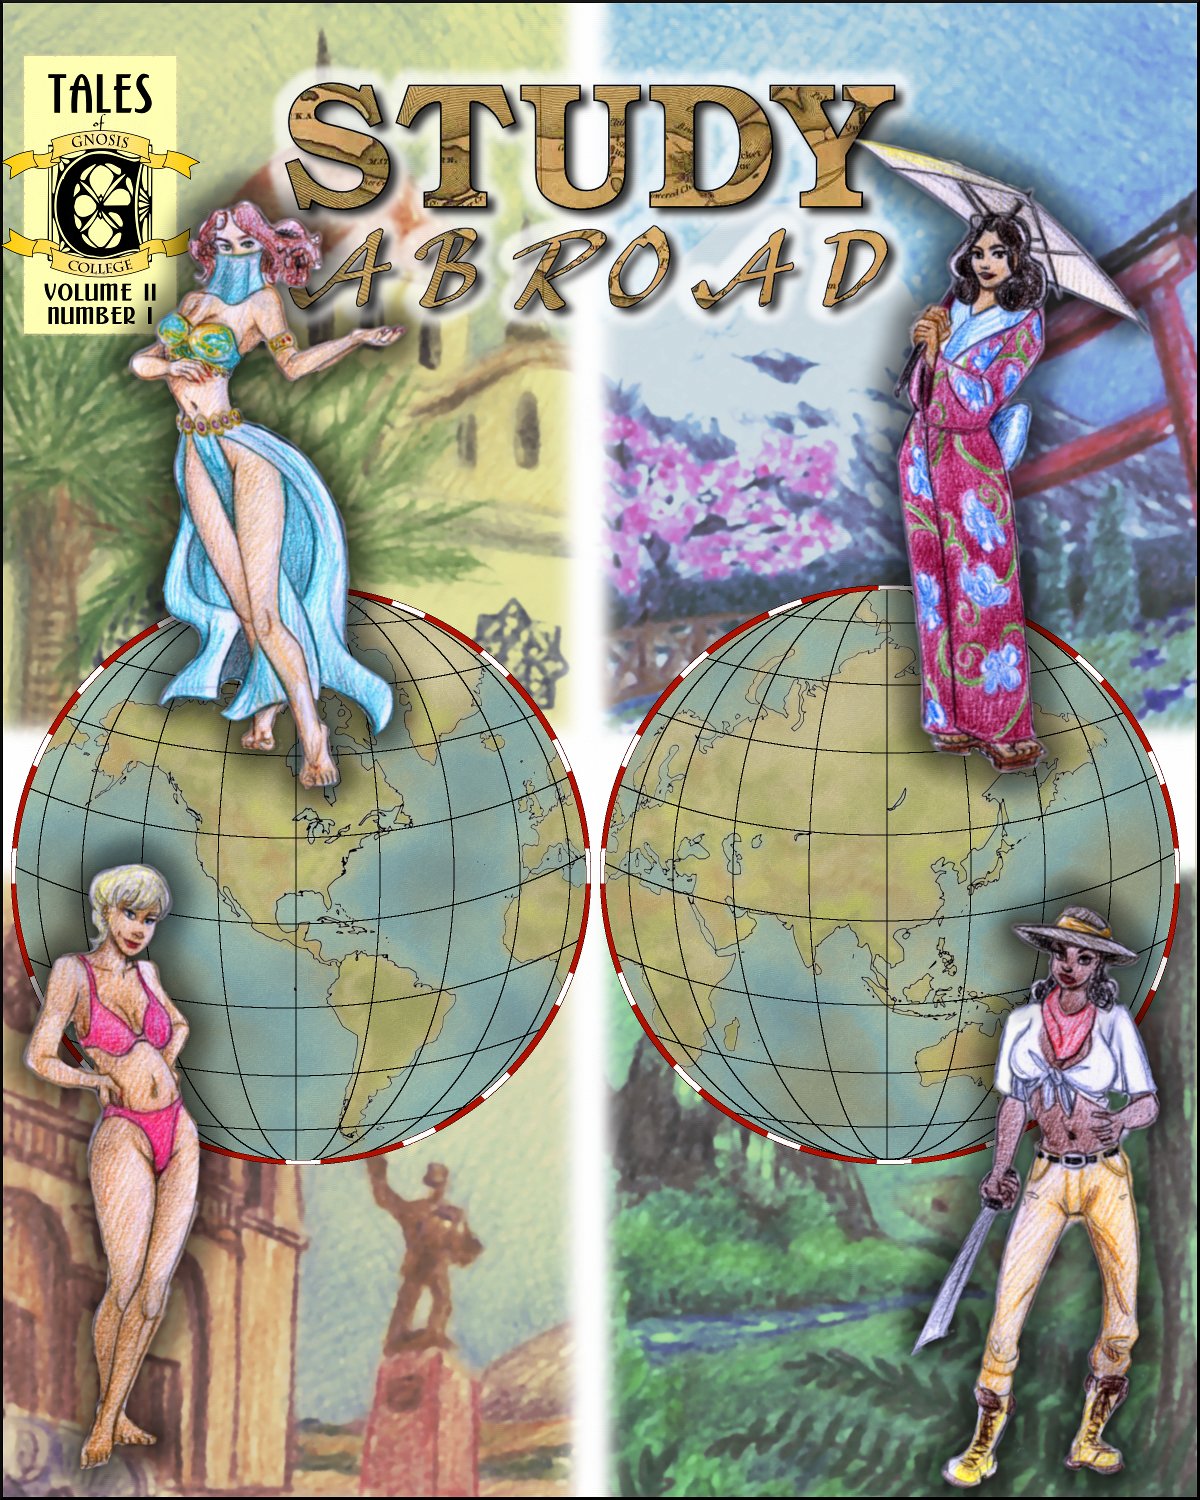 Four sexy coeds in the cover of the first issue of Study Abroad